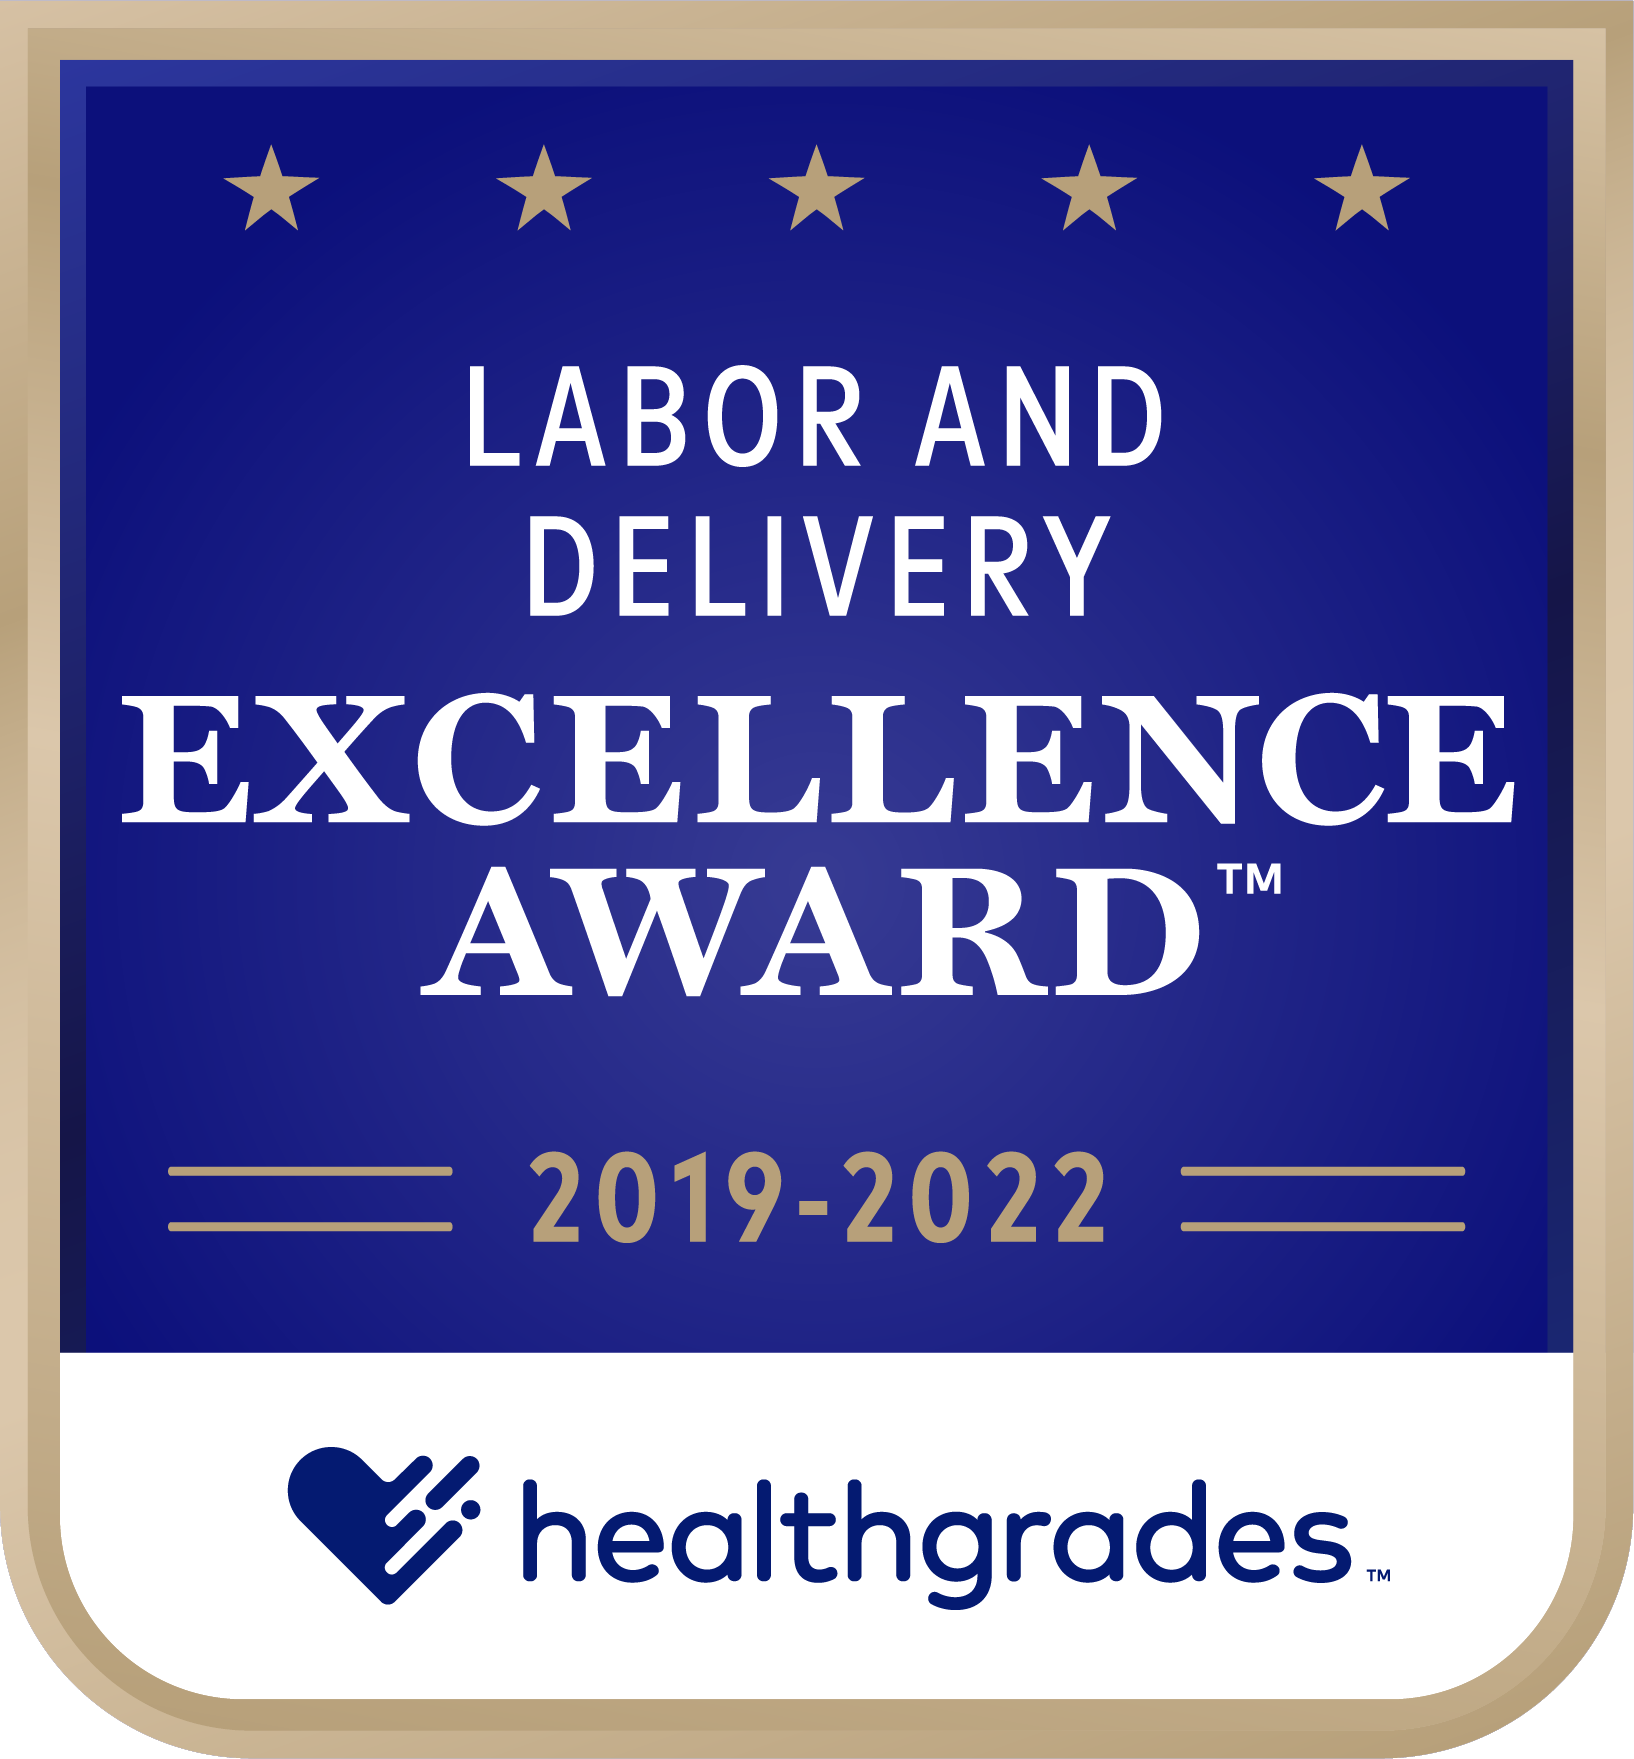 Recipient of the Healthgrades Labor and Delivery Excellence Award™ for 4 Years in a Row (2019-2022)